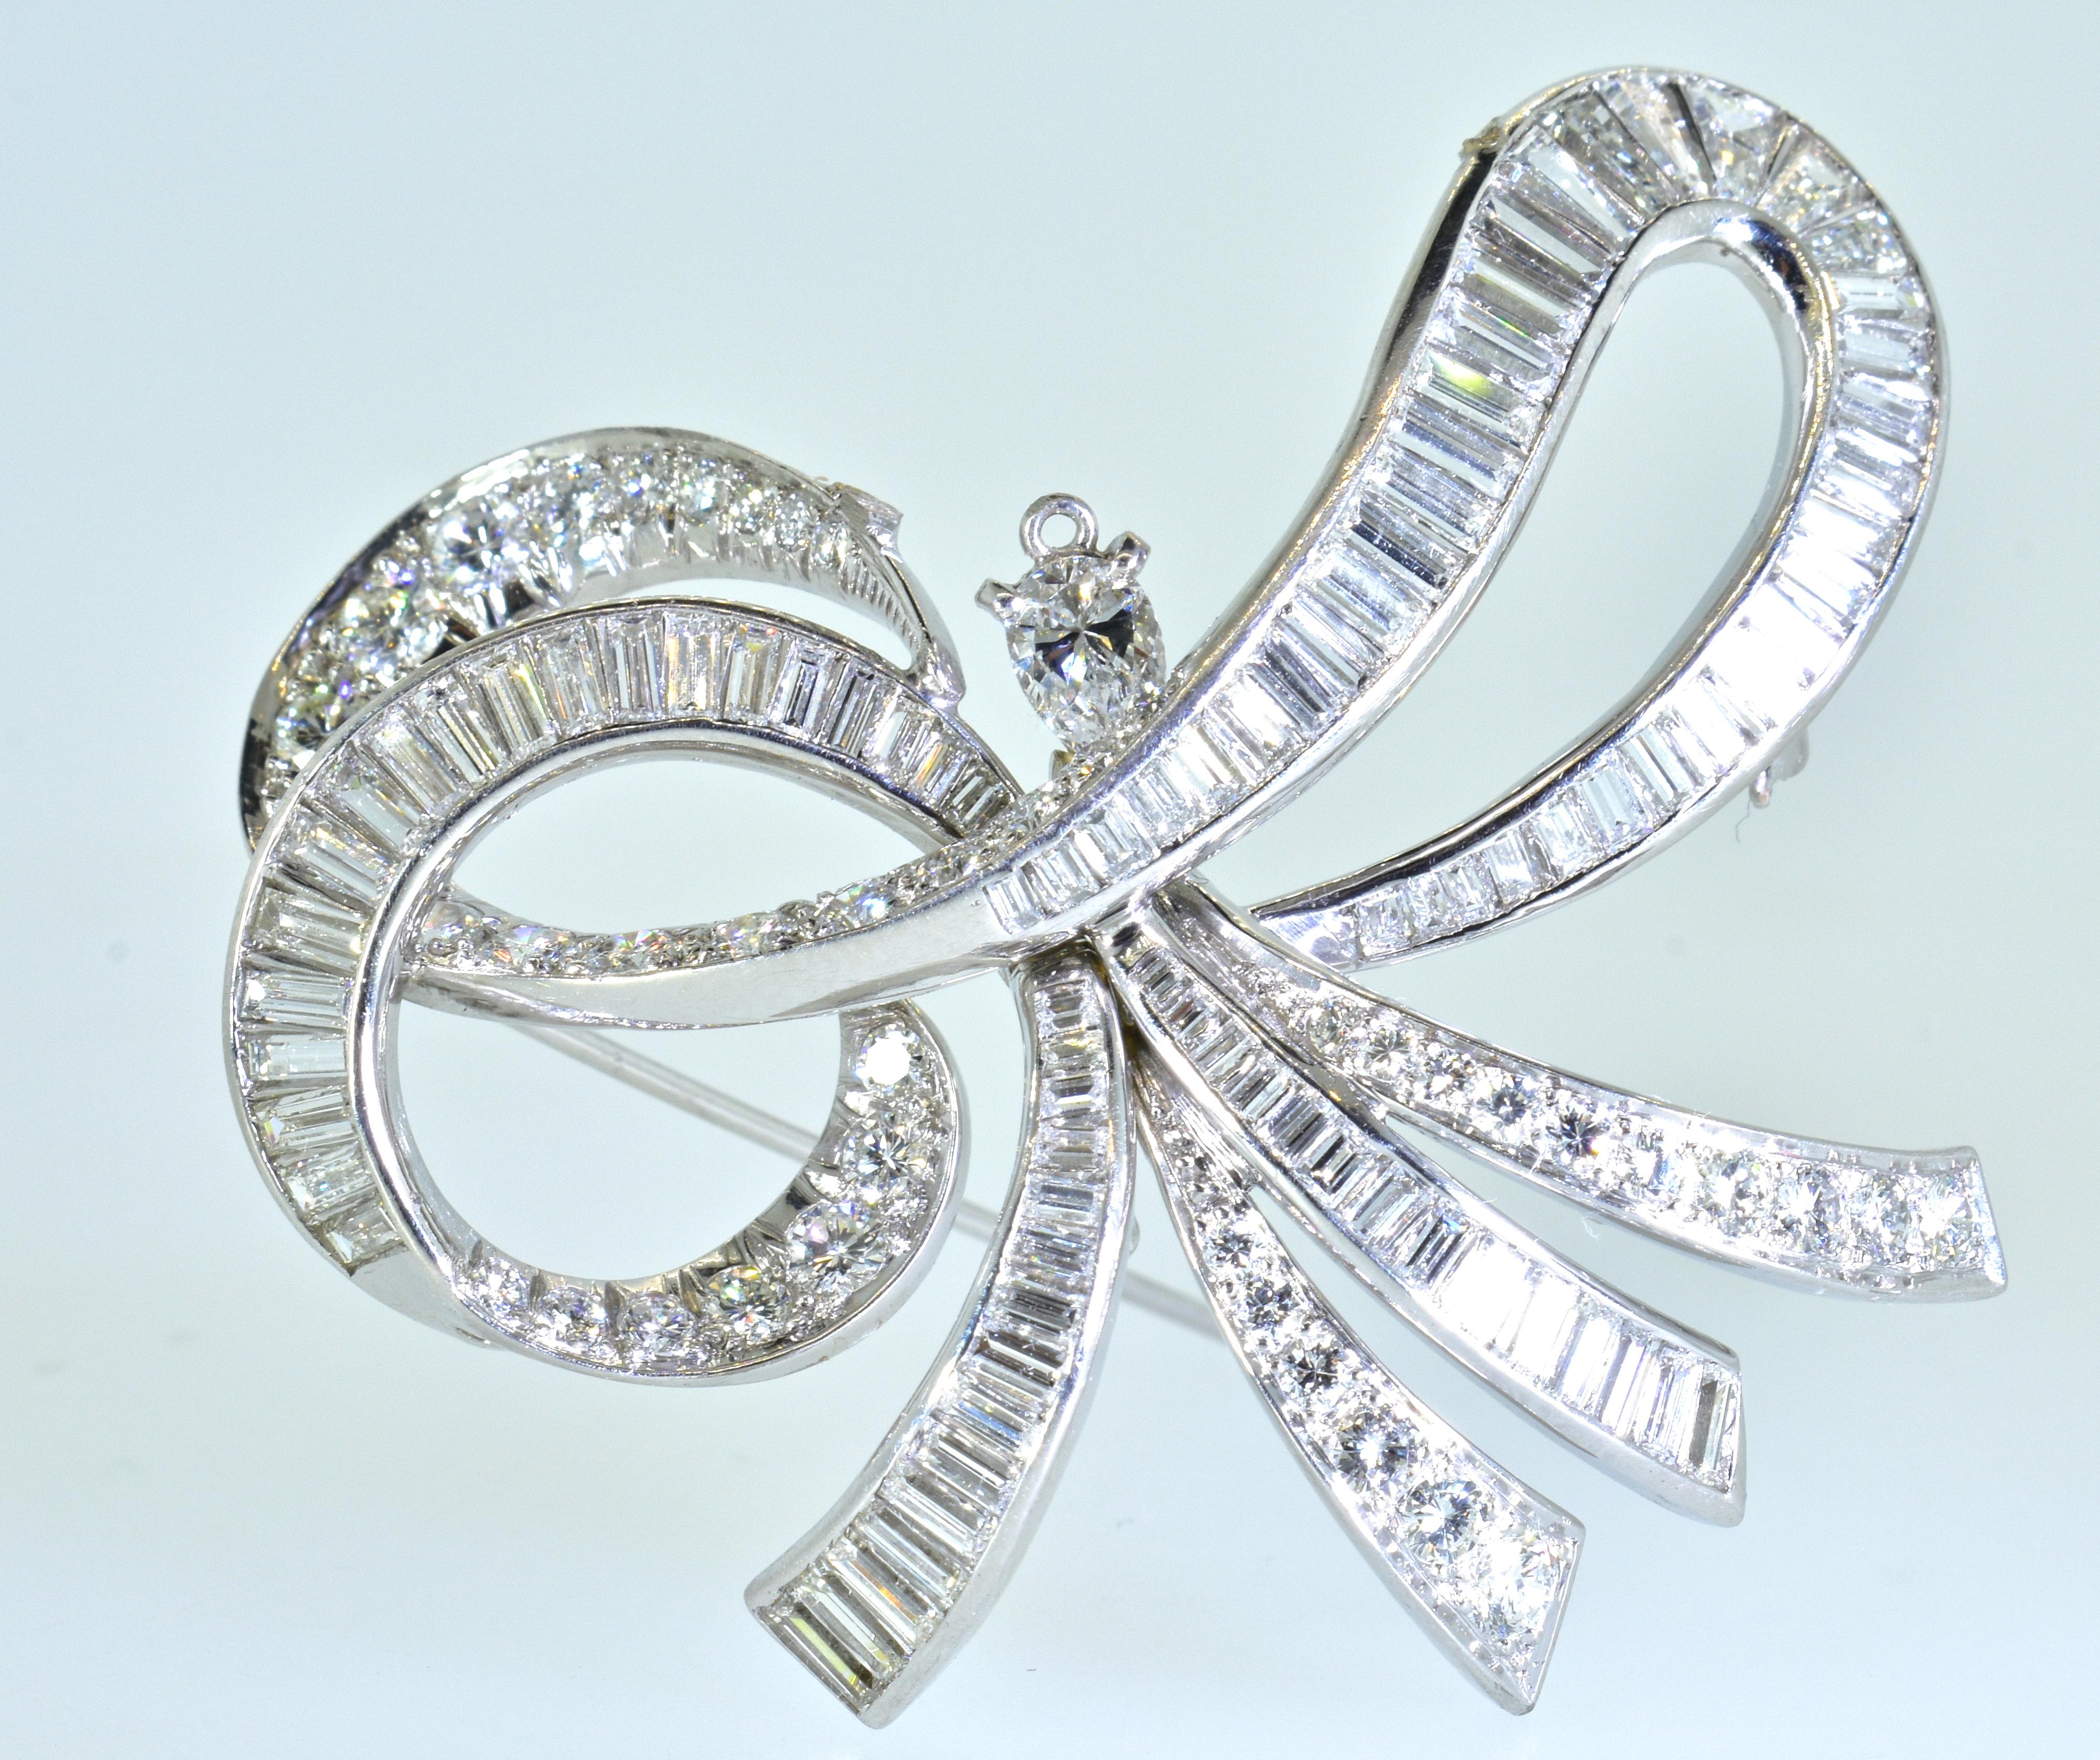 Diamond and platinum brooch (or pendant) in a stylized bow motif.  Composed of 4 different cuts of fine white diamonds - round brilliant cuts, a pear cut, baguette cuts, and tapered baguette cuts.  These diamonds are all of the same fine quality -